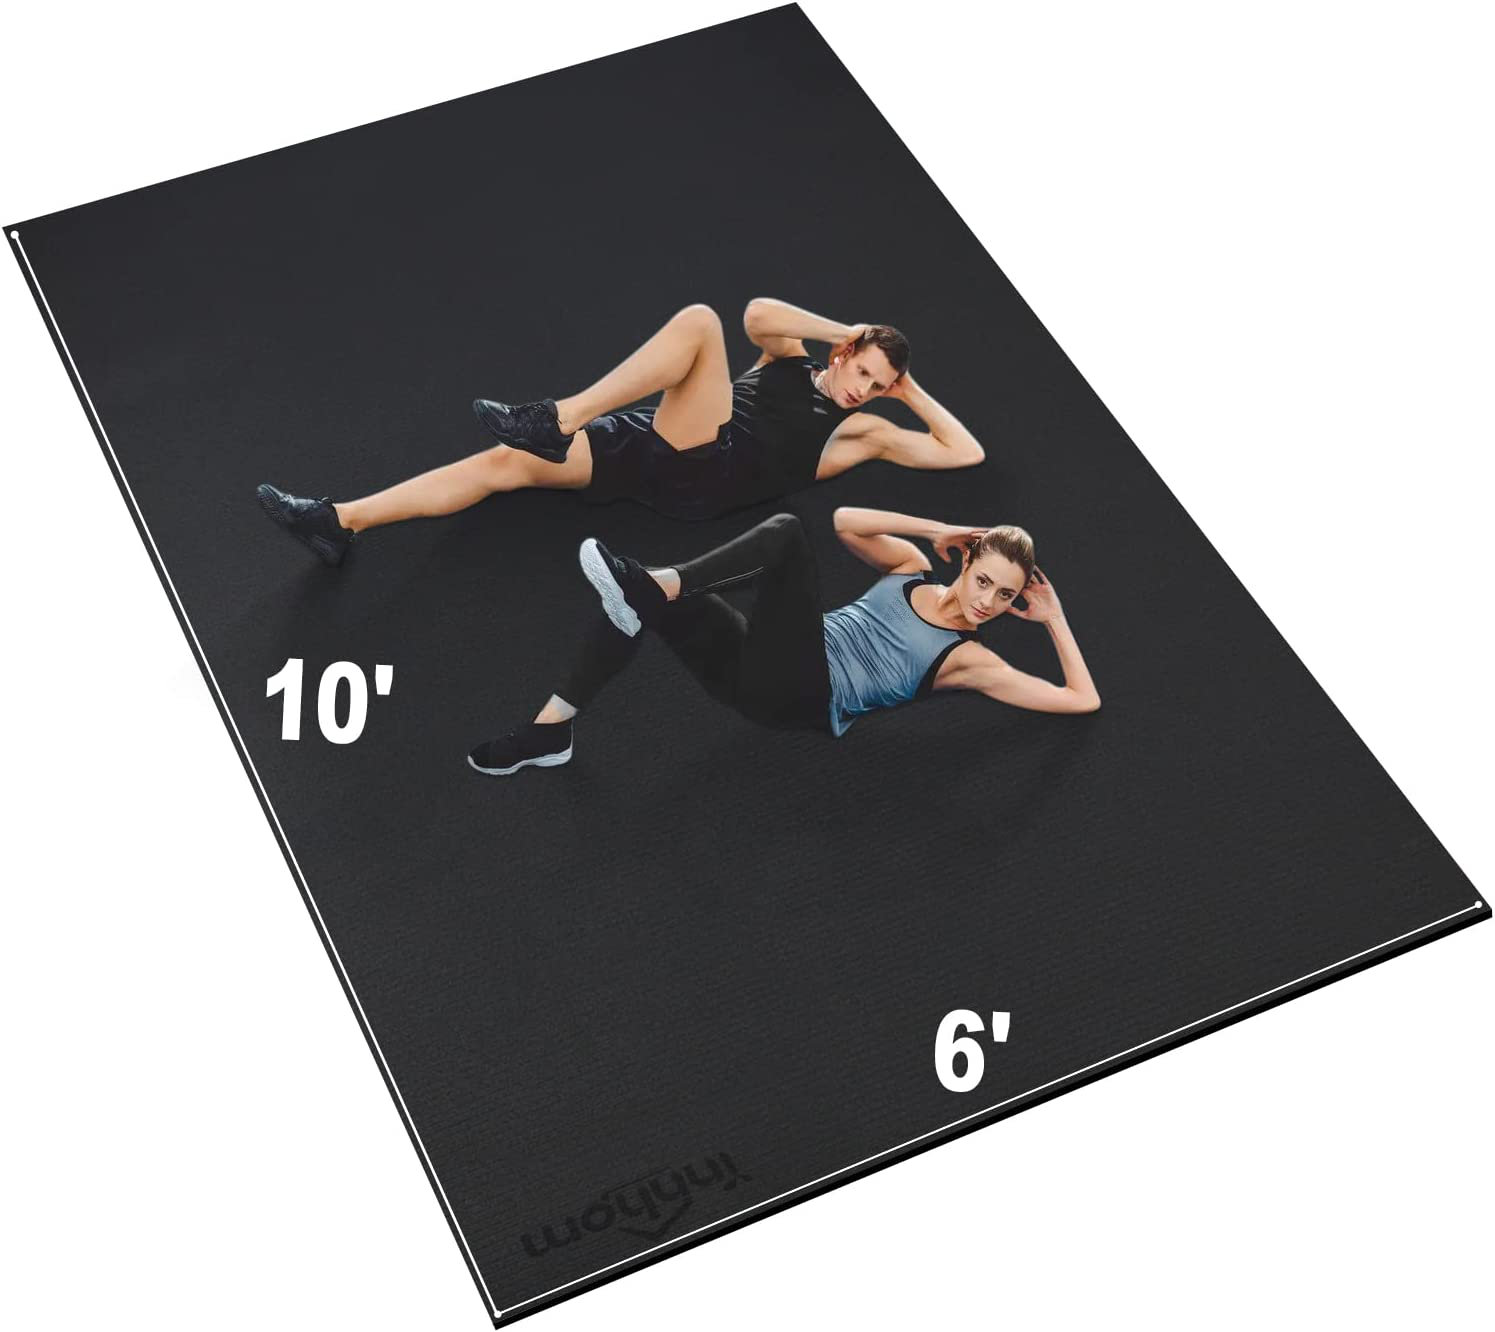 innhom Large Exercise Mat Innhom Workout Mat Gym Flooring for Home